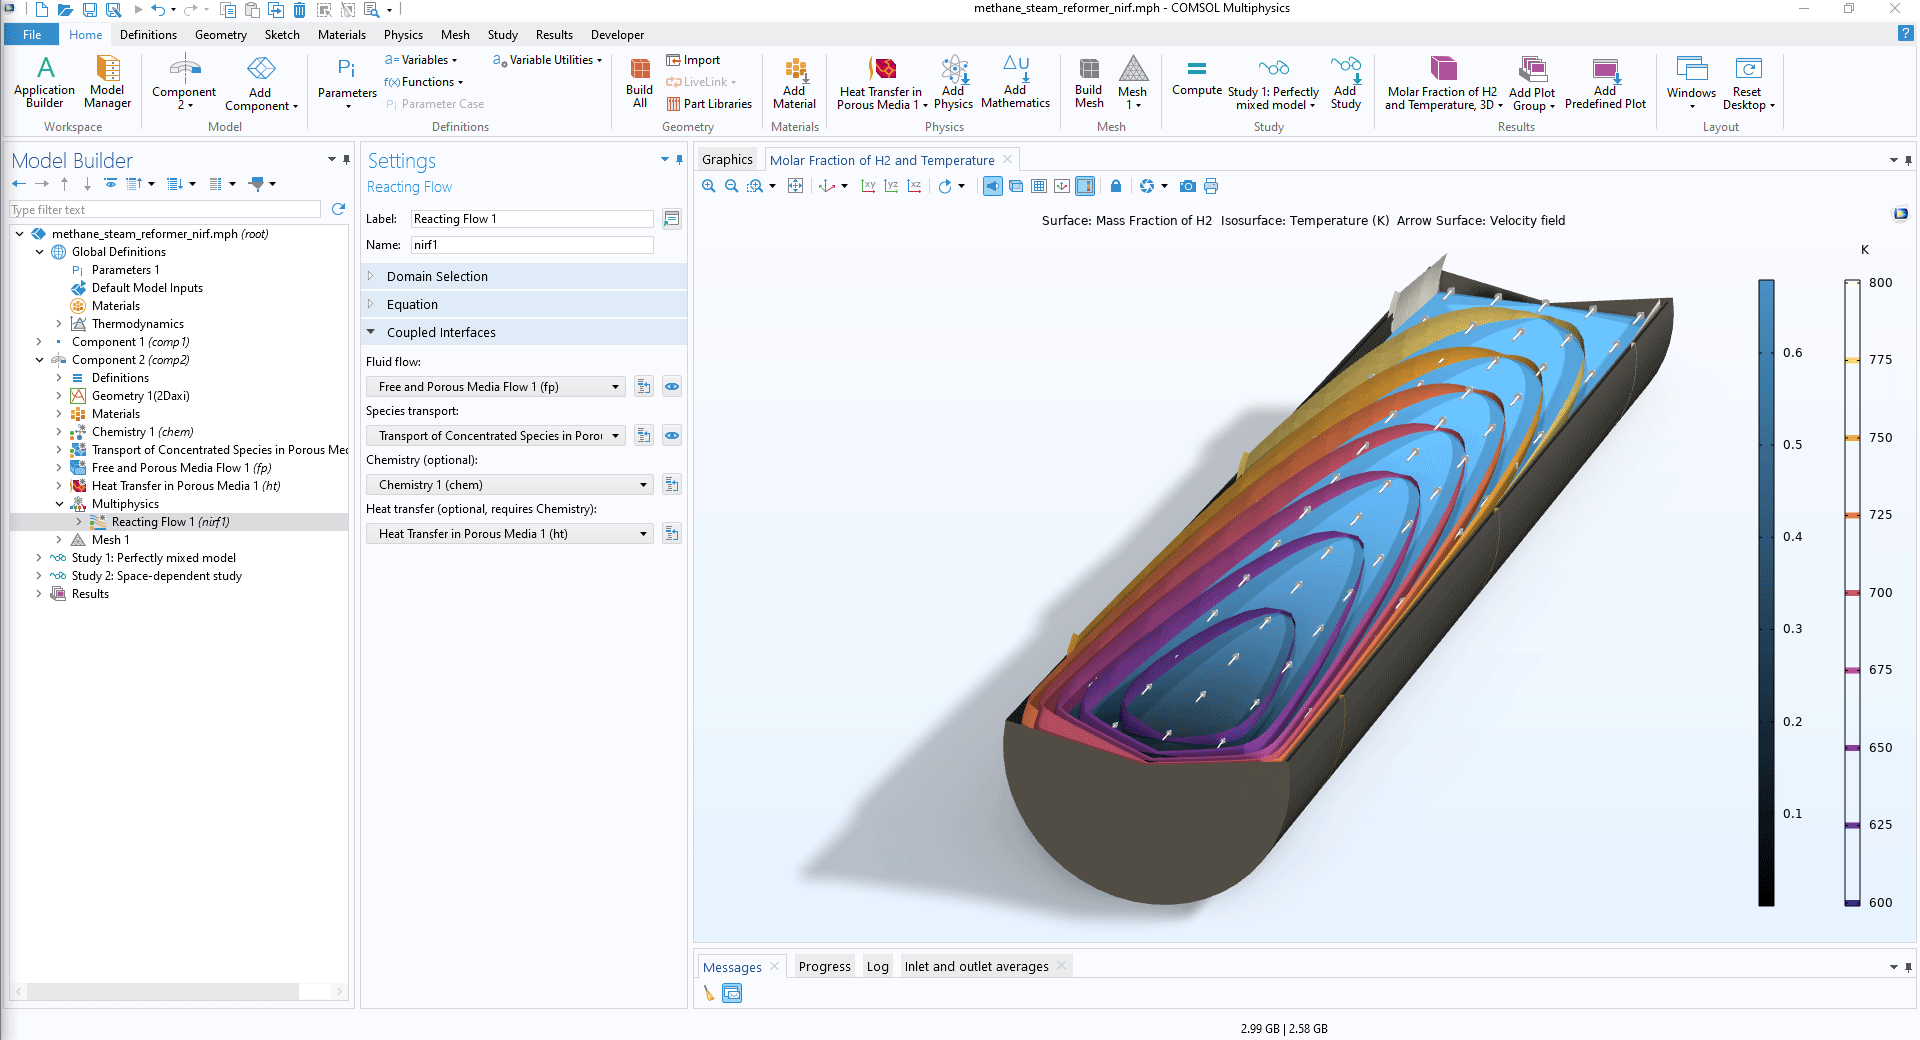 The COMSOL Multiphysics UI showing the Reacting Flow multiphysics coupling node highlighted, the corresponding Settings window, and a methane steam reformer model in the Graphics window.